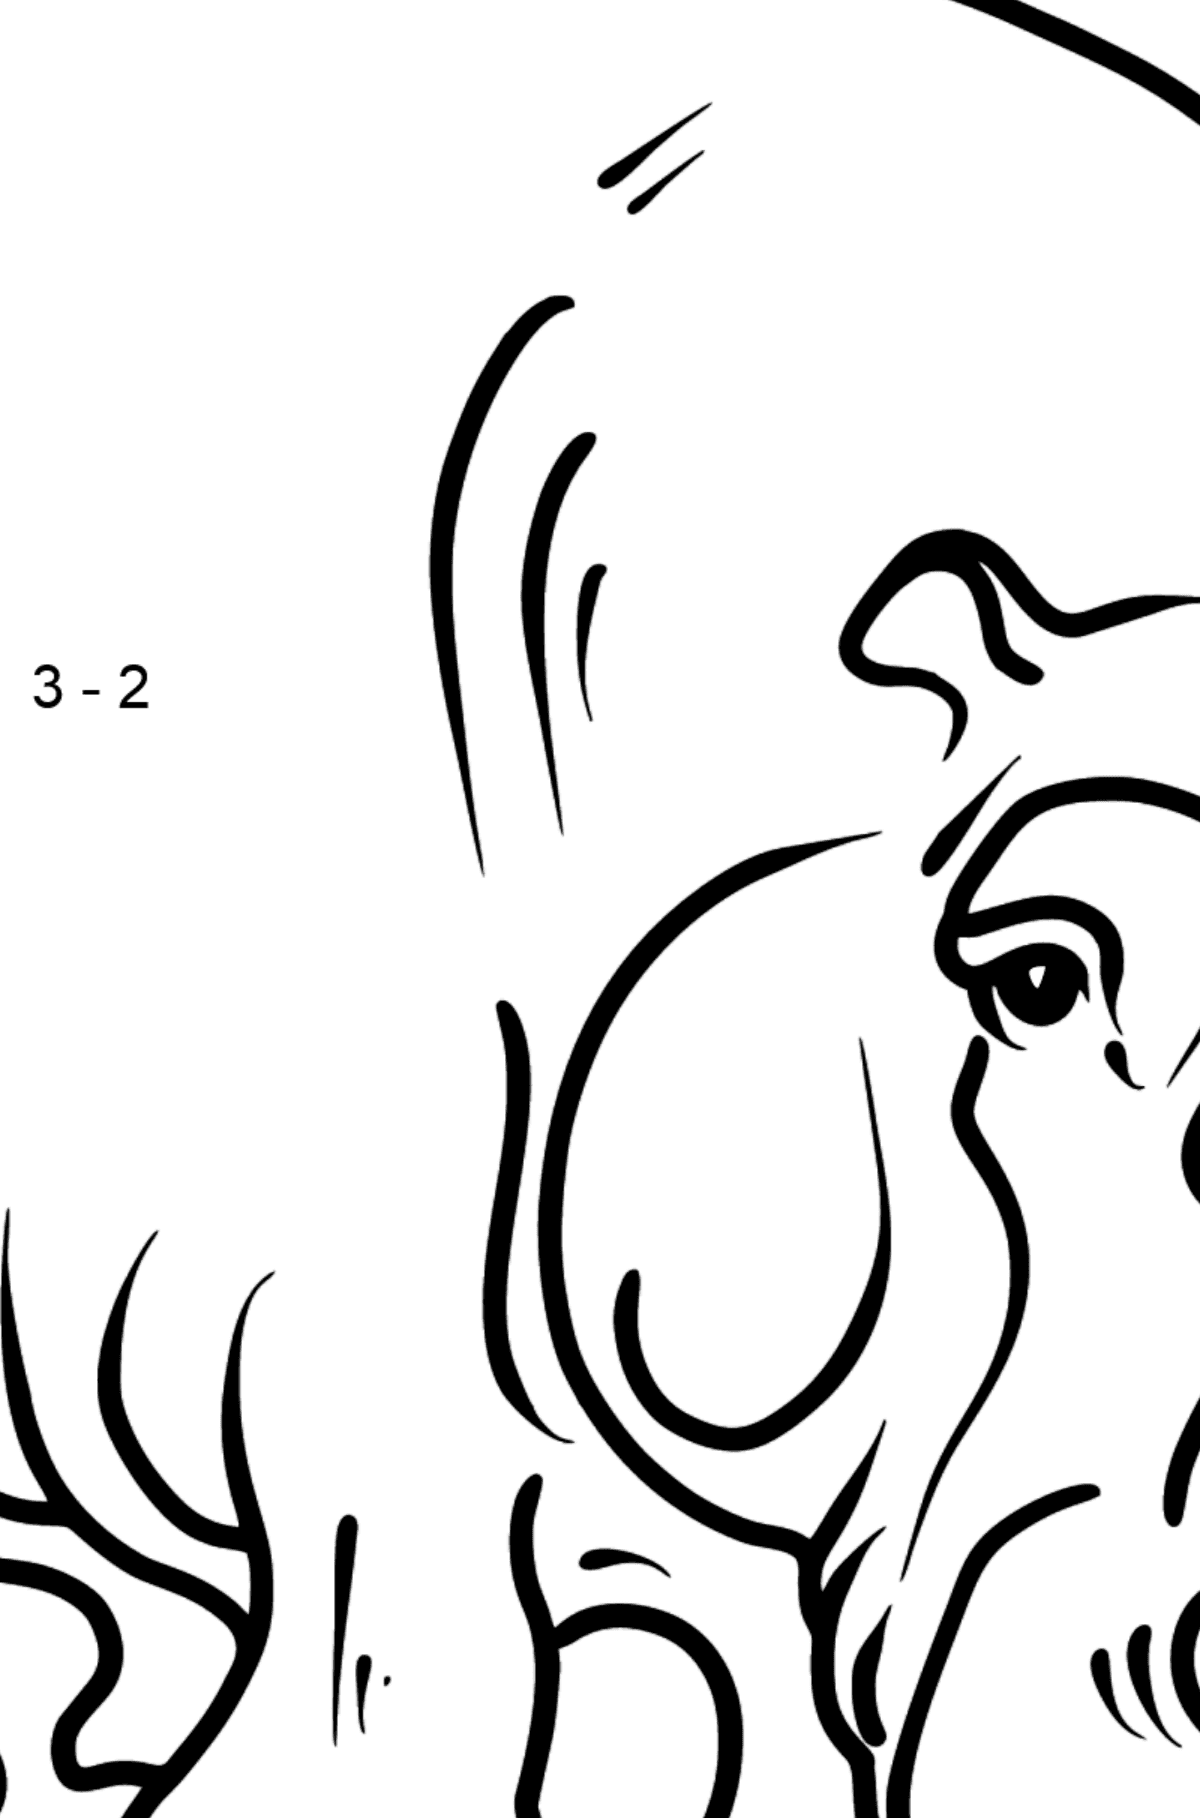 Hippo coloring page - Math Coloring - Subtraction for Kids